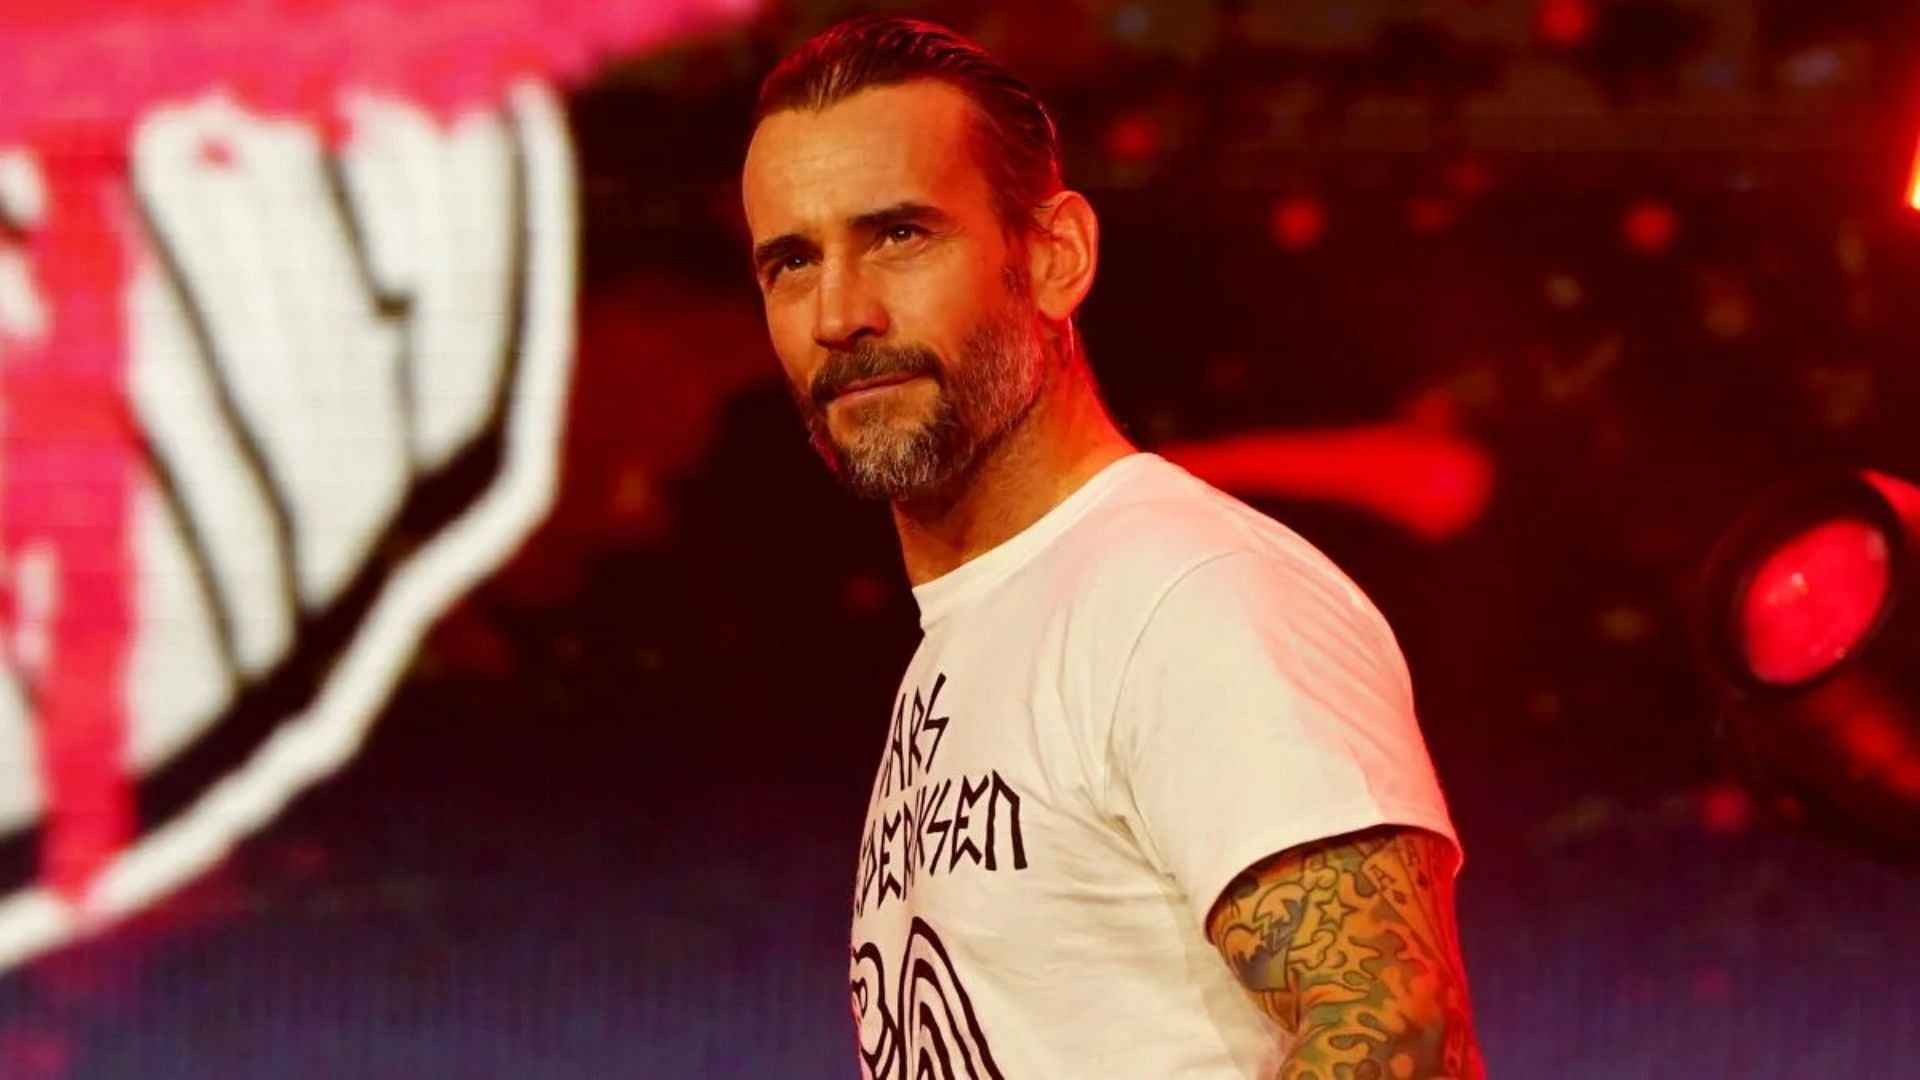 CM Punk has got a plethora of WWE Superstars to face